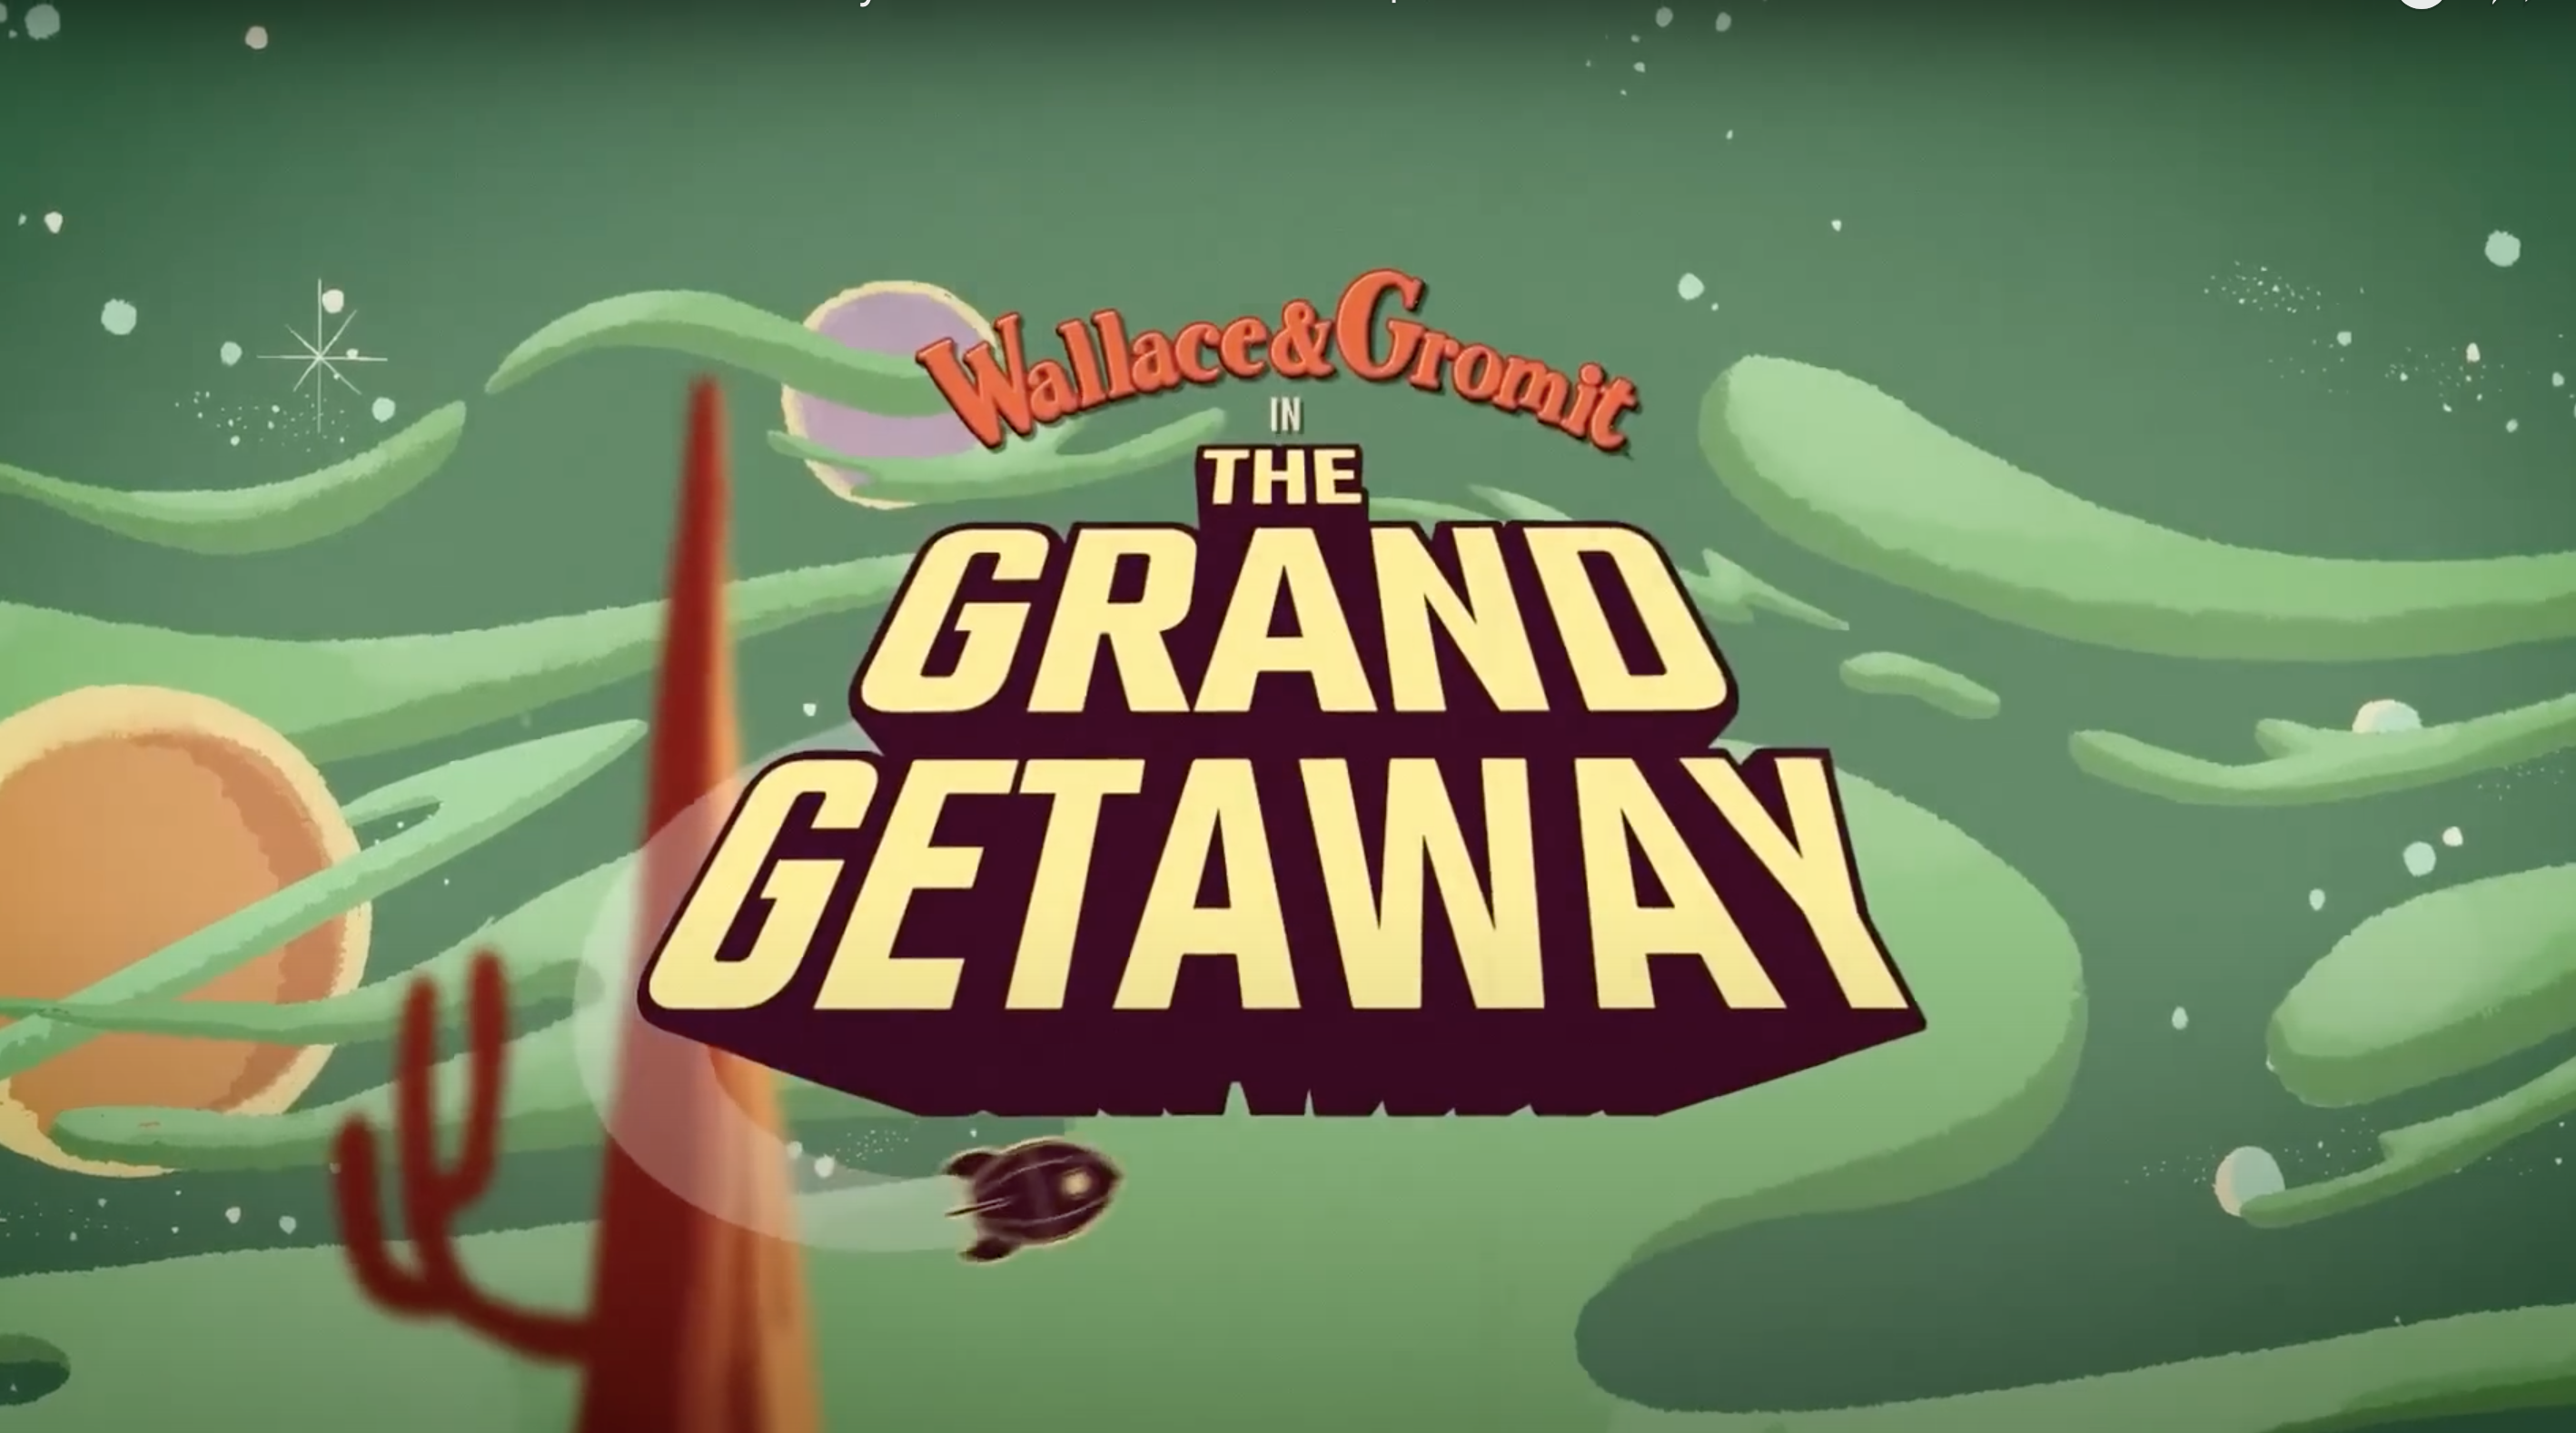 Wallace and Gromit – The Grand Getaway